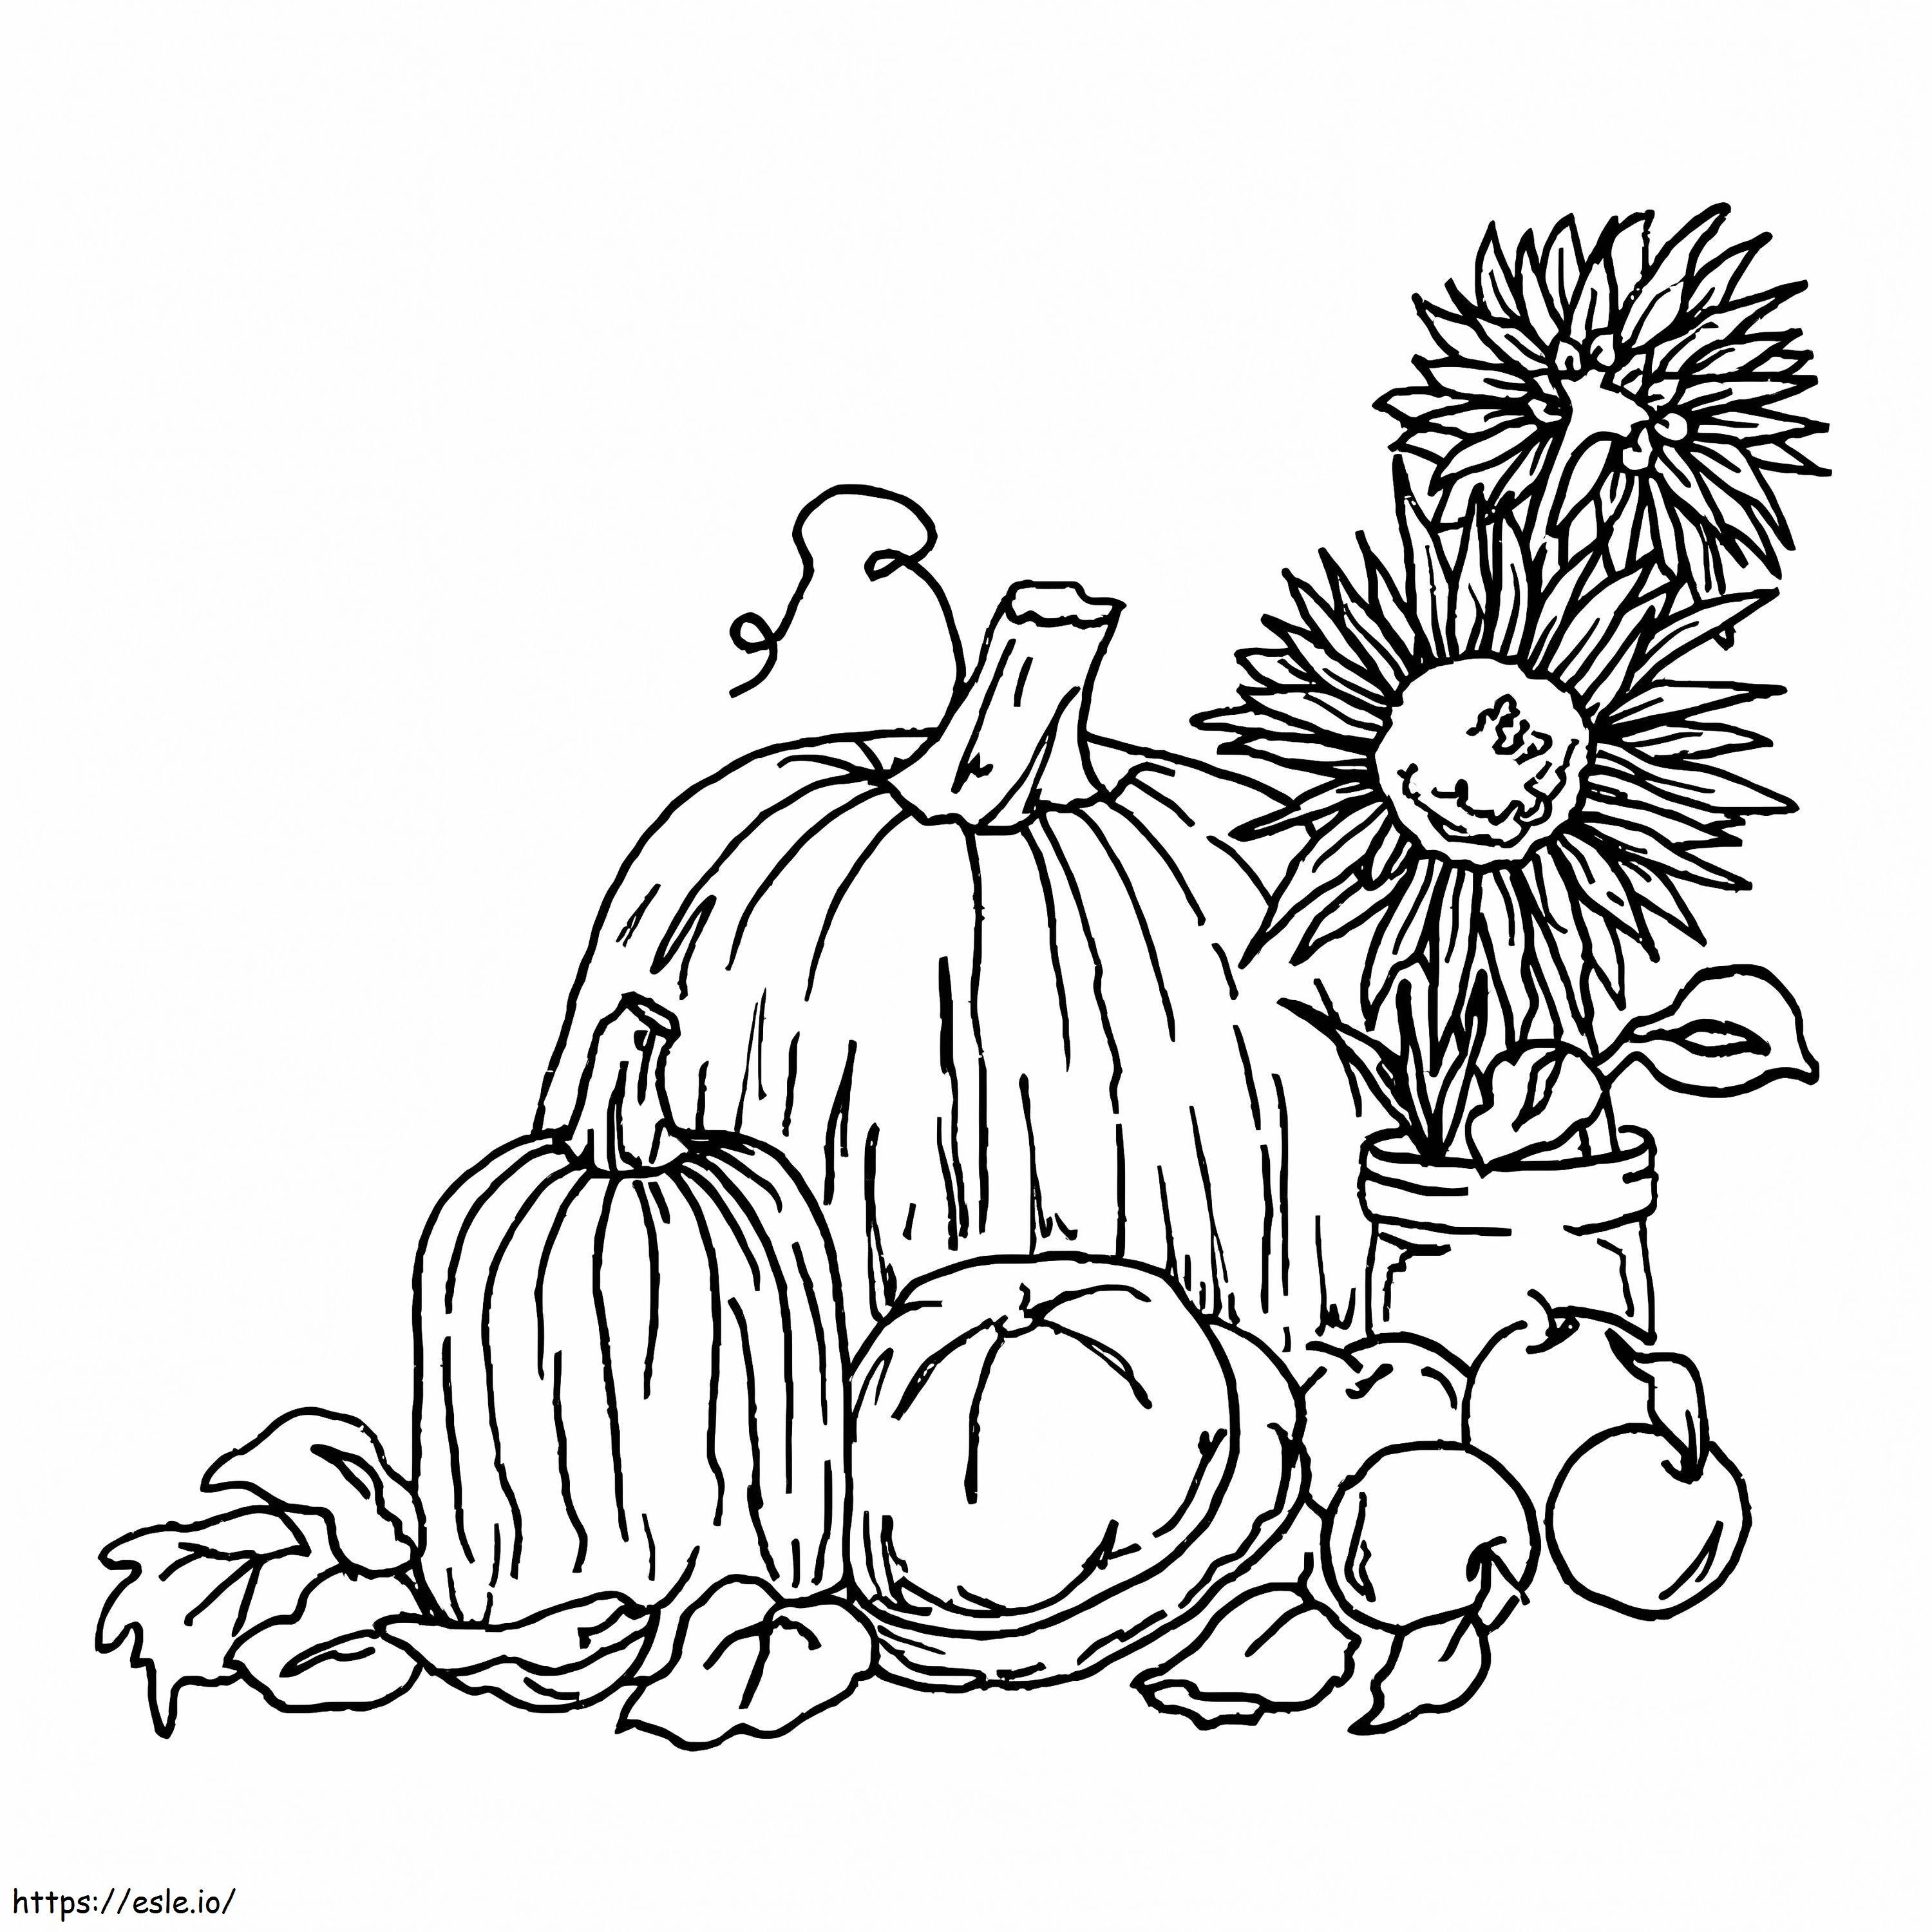 Fall Harvest 3 coloring page